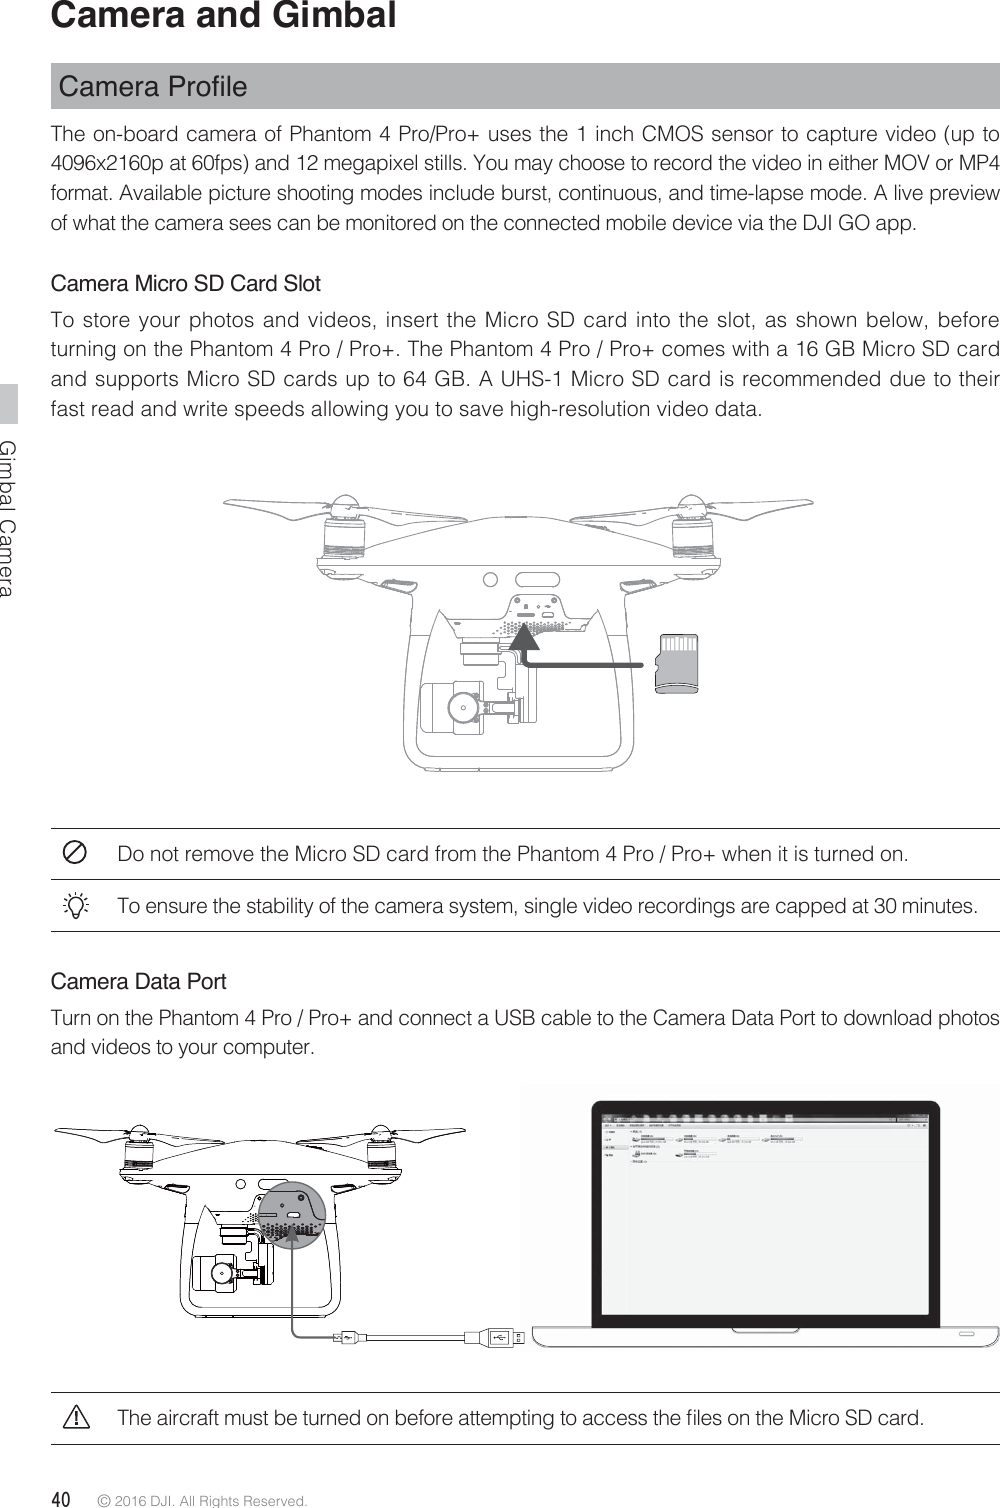 Gimbal Camera40 © 2016 DJI. All Rights Reserved. Camera and Gimbal &amp;DPHUD3URÀOHThe on-board camera of Phantom 4 Pro/Pro+ uses the 1 inch CMOS sensor to capture video (up to 4096x2160p at 60fps) and 12 megapixel stills. You may choose to record the video in either MOV or MP4 format. Available picture shooting modes include burst, continuous, and time-lapse mode. A live preview of what the camera sees can be monitored on the connected mobile device via the DJI GO app. Camera Micro SD Card SlotTo store your photos and videos, insert the Micro SD card into the slot, as shown below, before turning on the Phantom 4 Pro / Pro+. The Phantom 4 Pro / Pro+ comes with a 16 GB Micro SD card and supports Micro SD cards up to 64 GB. A UHS-1 Micro SD card is recommended due to their fast read and write speeds allowing you to save high-resolution video data.Do not remove the Micro SD card from the Phantom 4 Pro / Pro+ when it is turned on.To ensure the stability of the camera system, single video recordings are capped at 30 minutes.Camera Data PortTurn on the Phantom 4 Pro / Pro+ and connect a USB cable to the Camera Data Port to download photos and videos to your computer.5IFBJSDSBGUNVTUCFUVSOFEPOCFGPSFBUUFNQUJOHUPBDDFTTUIFmMFTPOUIF.JDSP4%DBSE